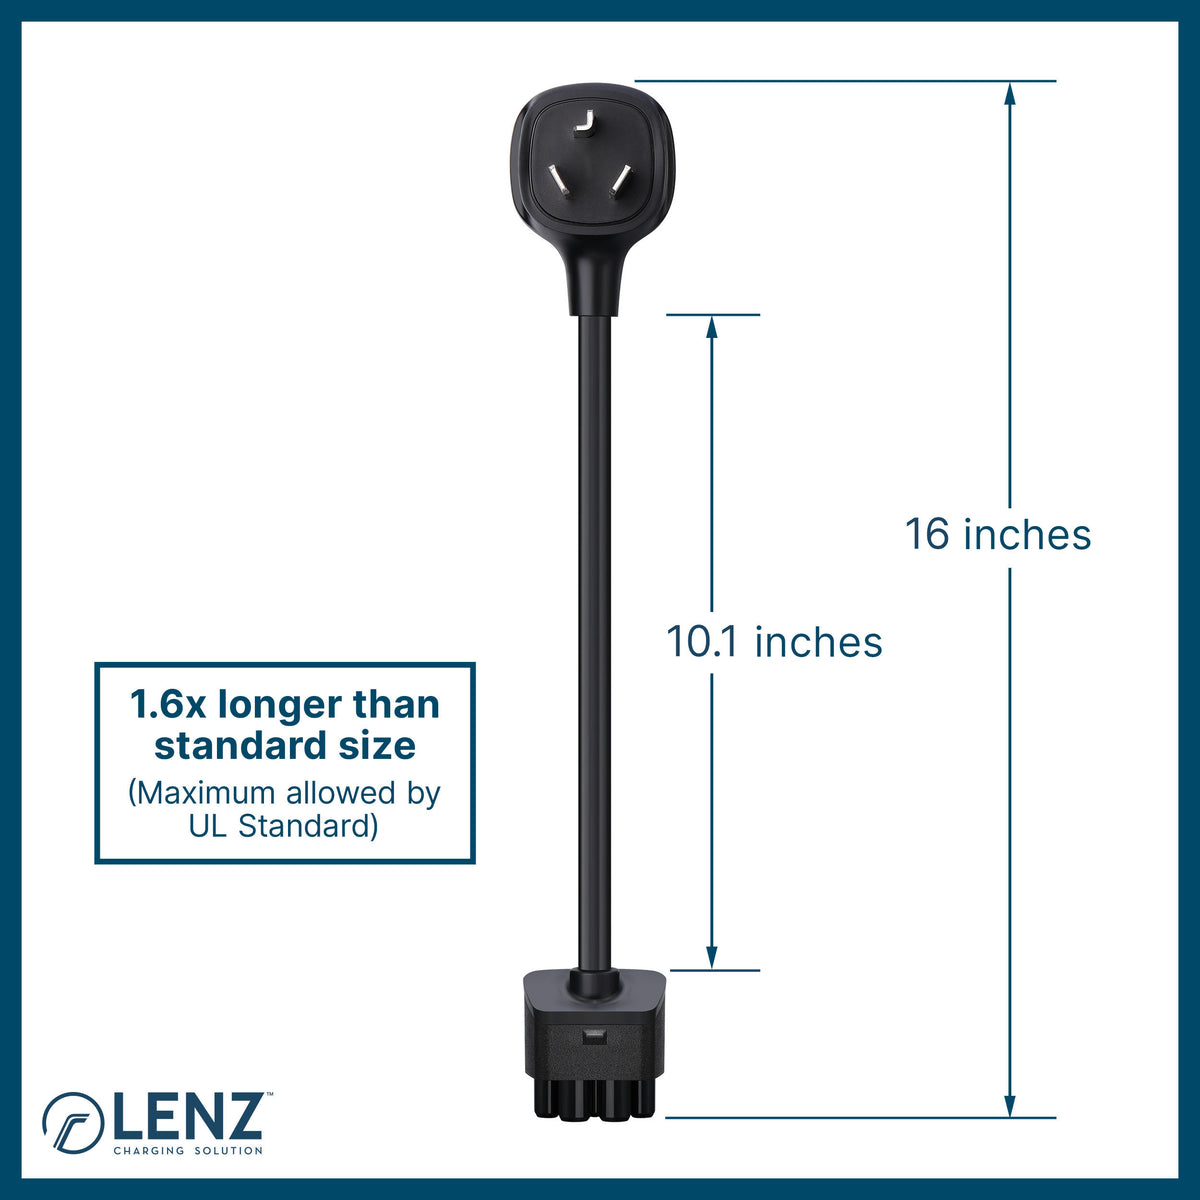 LENZ NEMA 10-30 Adapter for Tesla Gen 2 Mobile Connector Measures 16 inches end-to-end